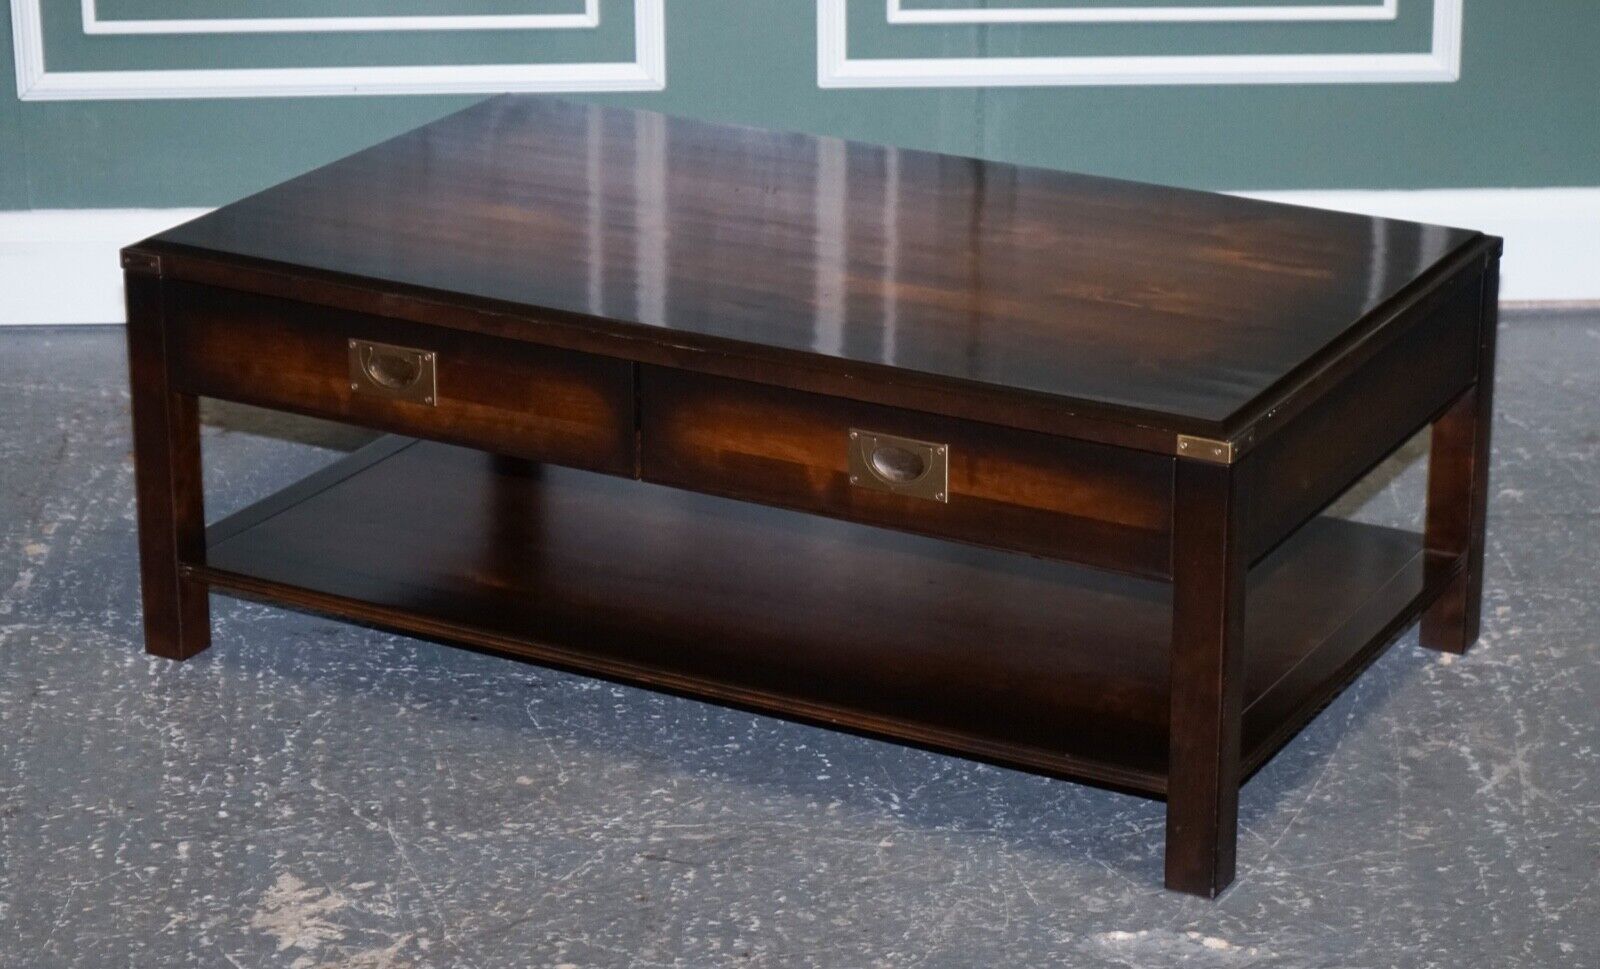 STUNNING VINTAGE MILITARY CAMPAIGN MAHOGANY & BRASS COFFEE TABLE